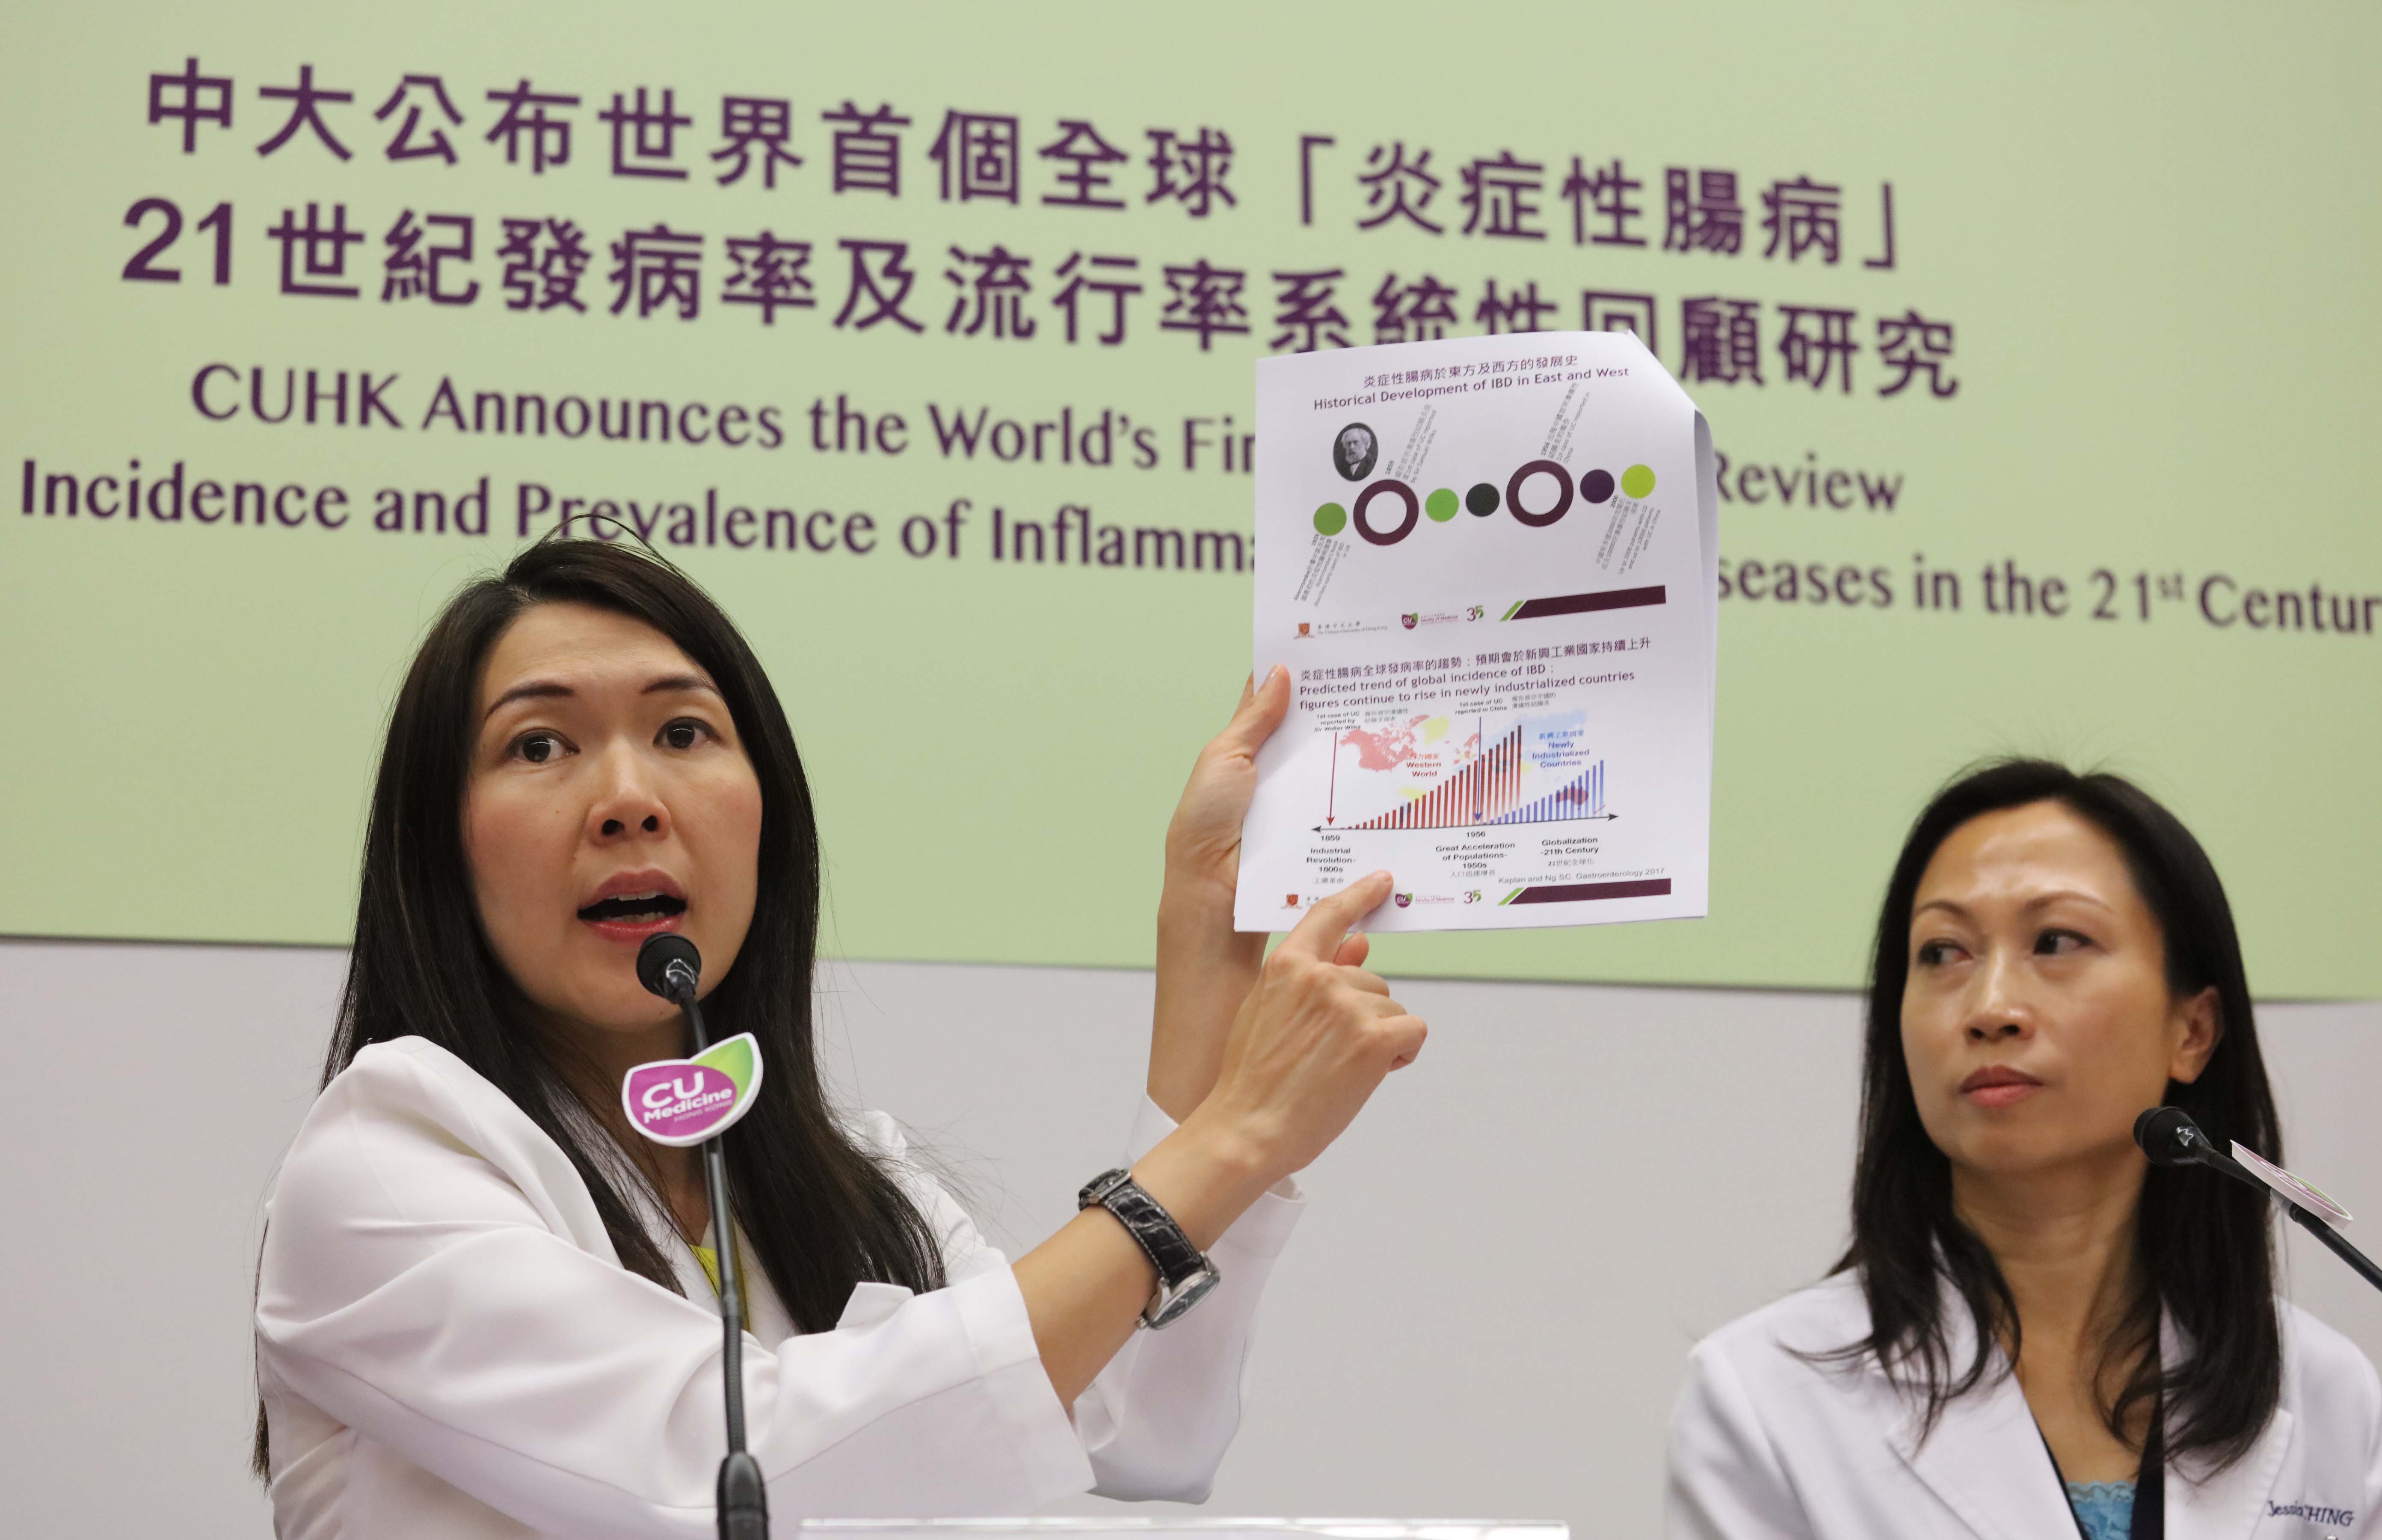 Prof. Siew NG (left) states that Inflammatory Bowel Disease was traditionally regarded as a disease of Westernized nations, but newer epidemiologic studies indicate that the incidence is rising in Asia, highlighting that IBD has emerged as a global public health challenge.